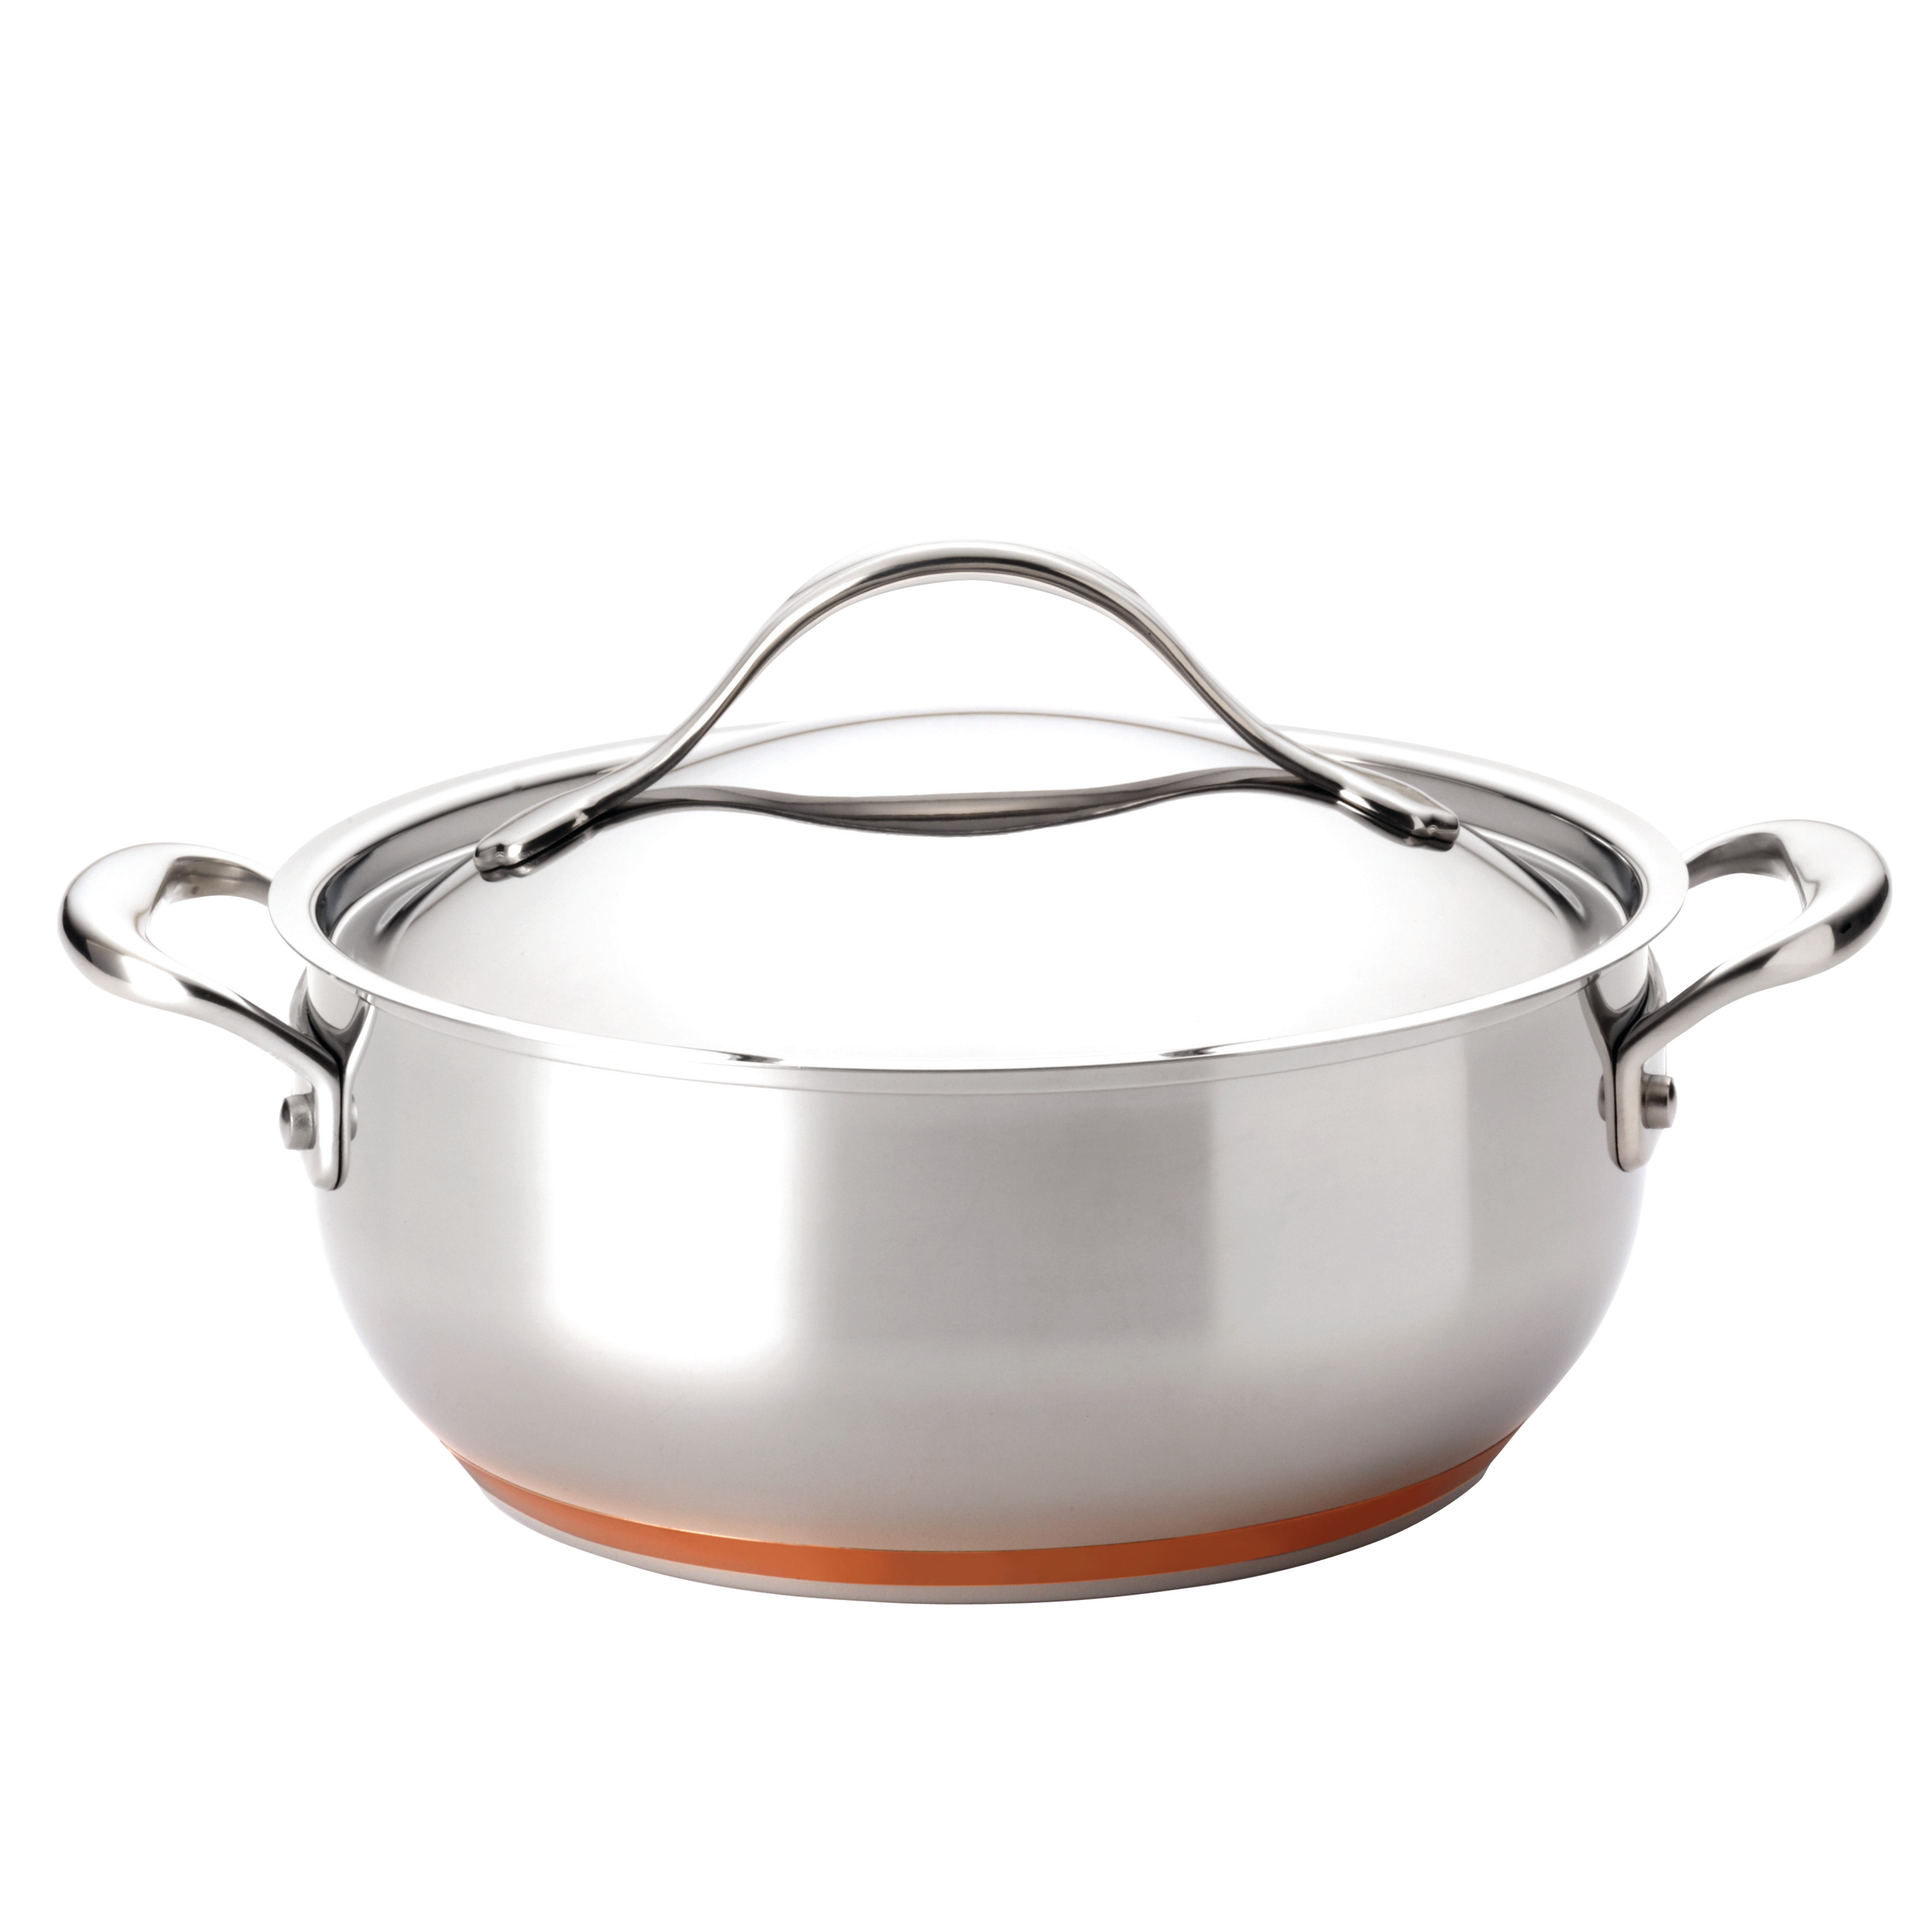 Stainless Steel Casserole Pot With Lid - Silver With Copper